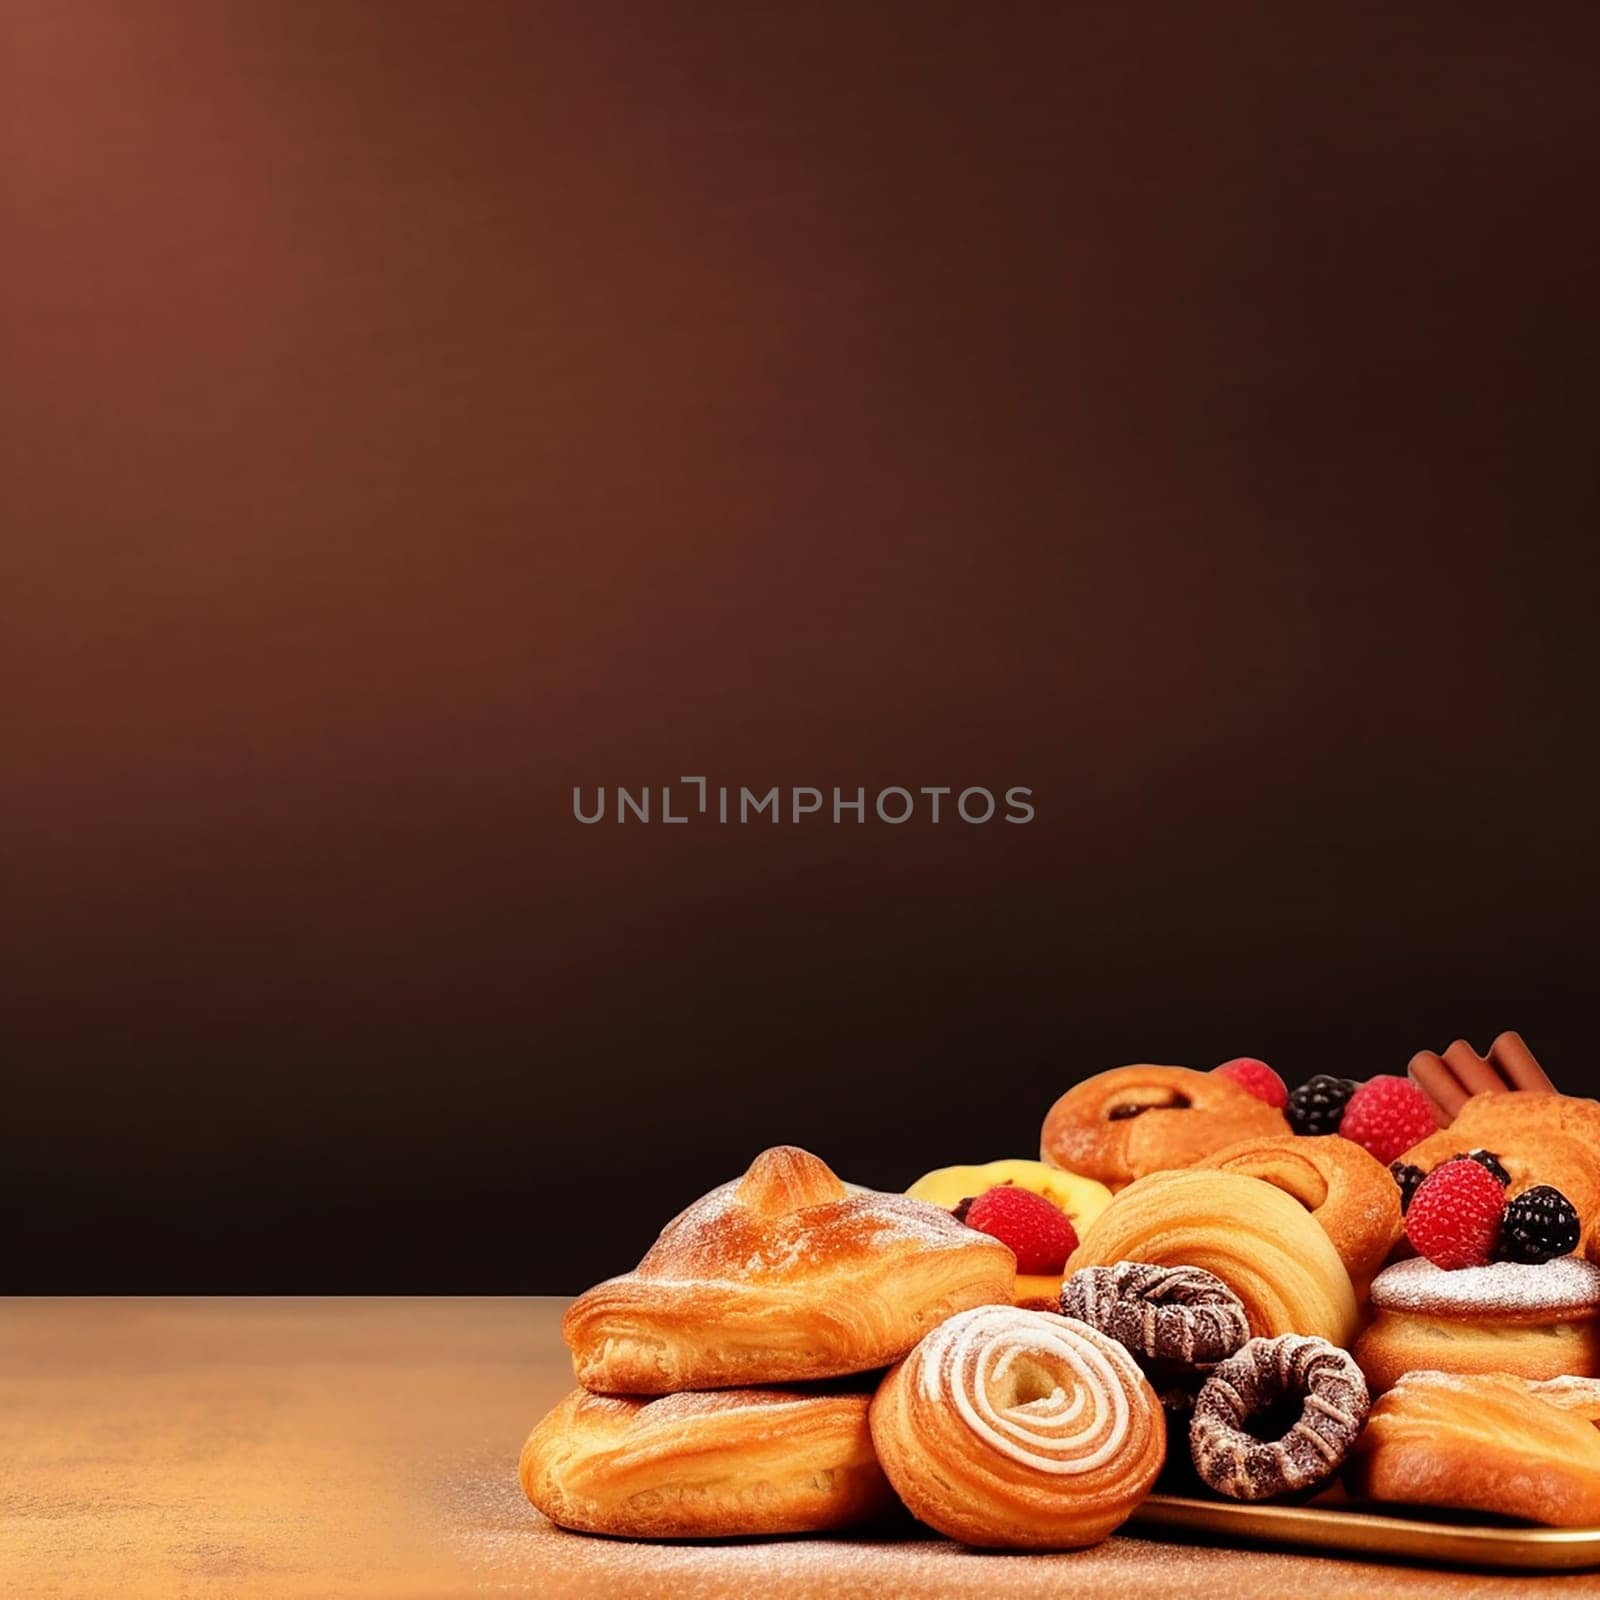 Assorted pastries with berries on a wooden surface against a dark background